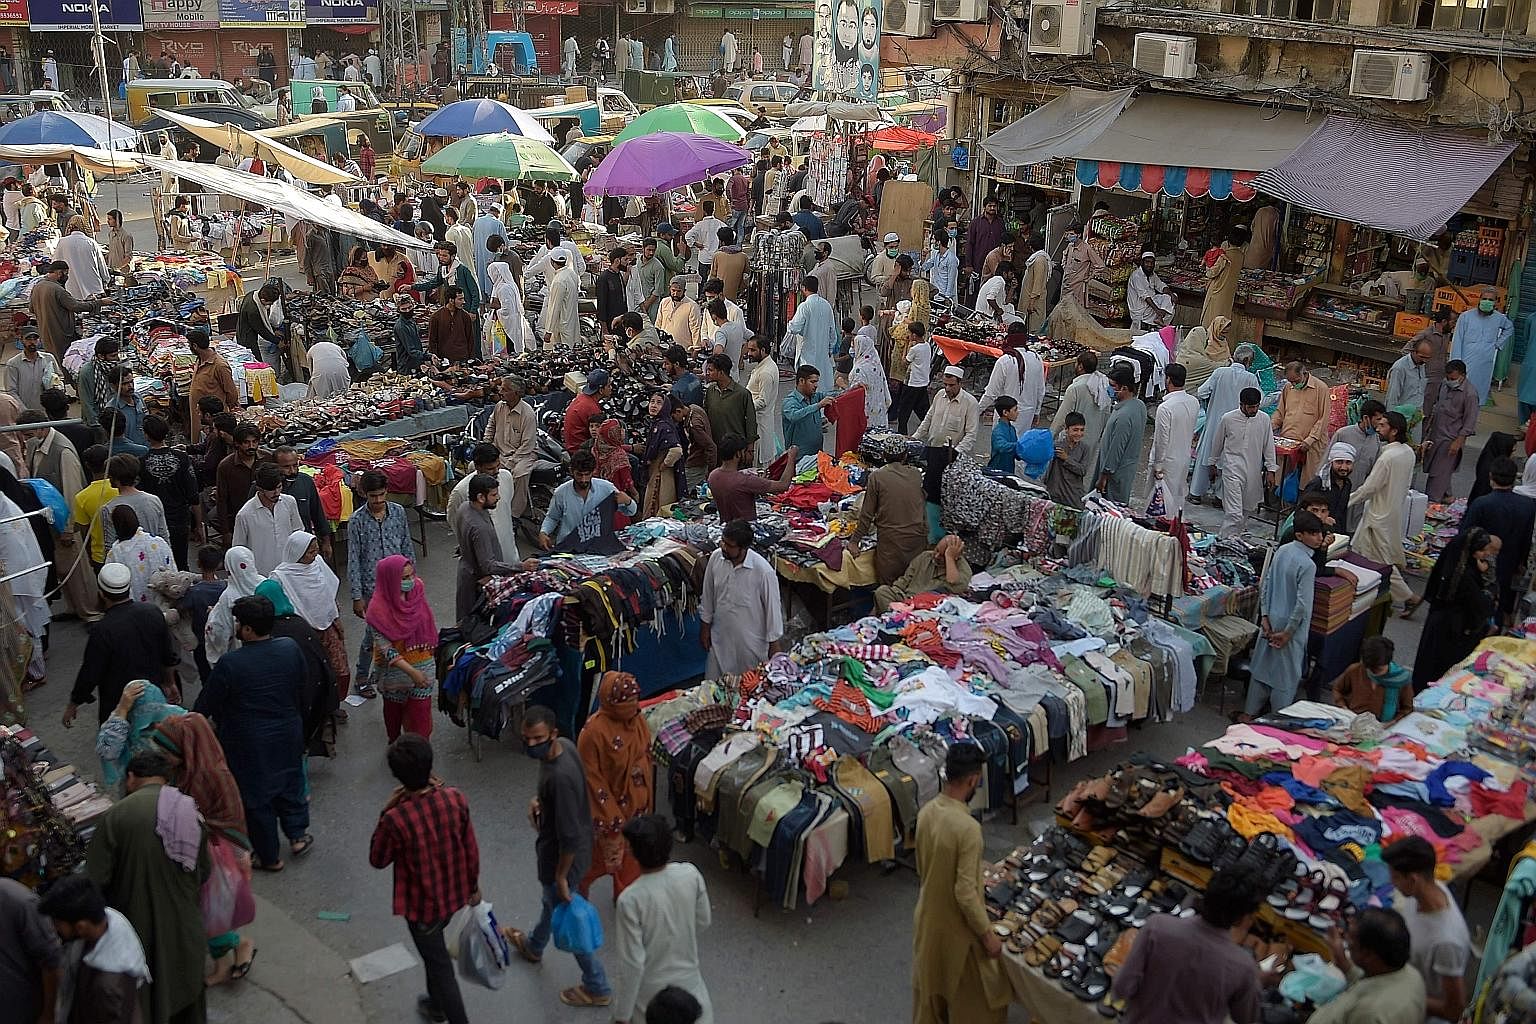 A market in Raja Bazaar in the Pakistani city of Rawalpindi on Tuesday. In Pakistan, malls and markets have reopened along with mosques - in contrast with India where a lockdown remains in place. PHOTO: AGENCE FRANCE-PRESSE